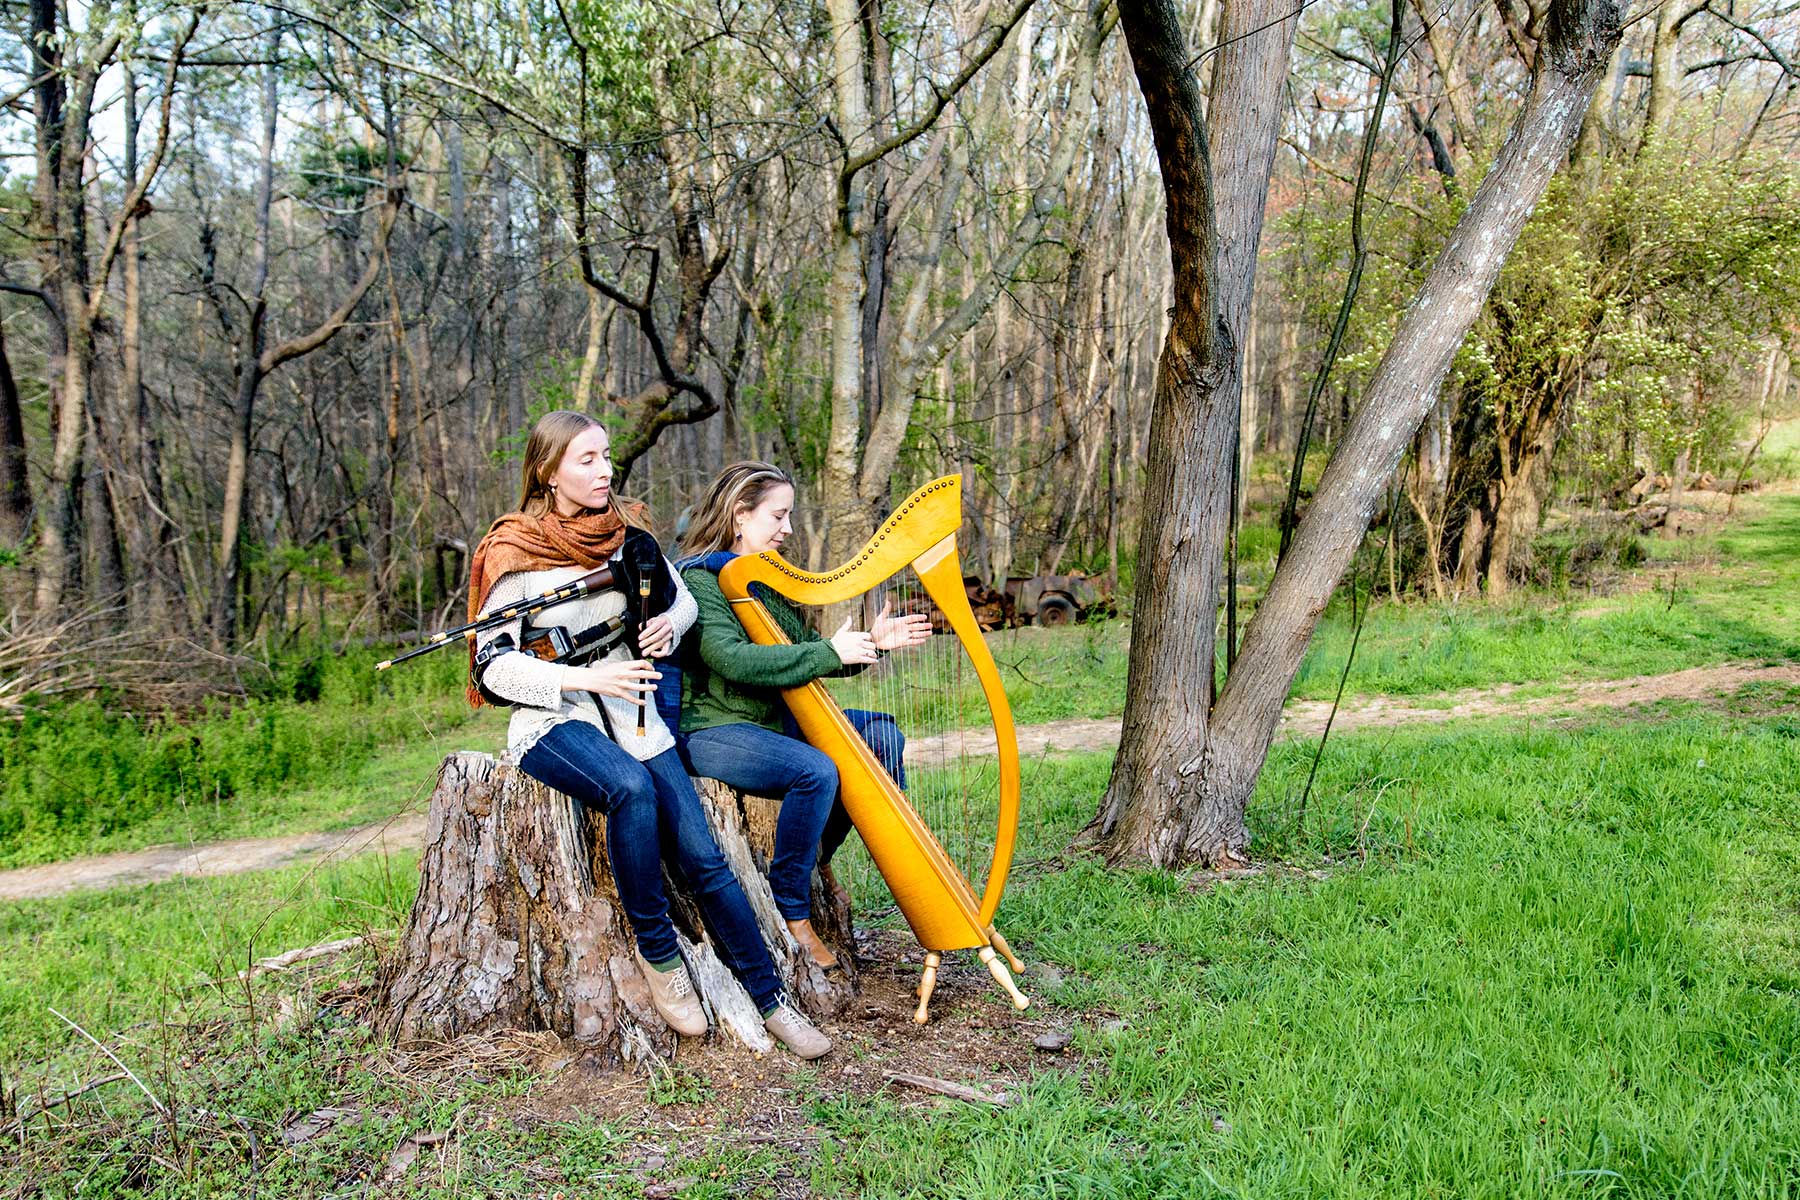 The Reel Sisters sitting on a tree stump. Rosalind is playing the Scottish smallpipes. Kelly is playing the harp.